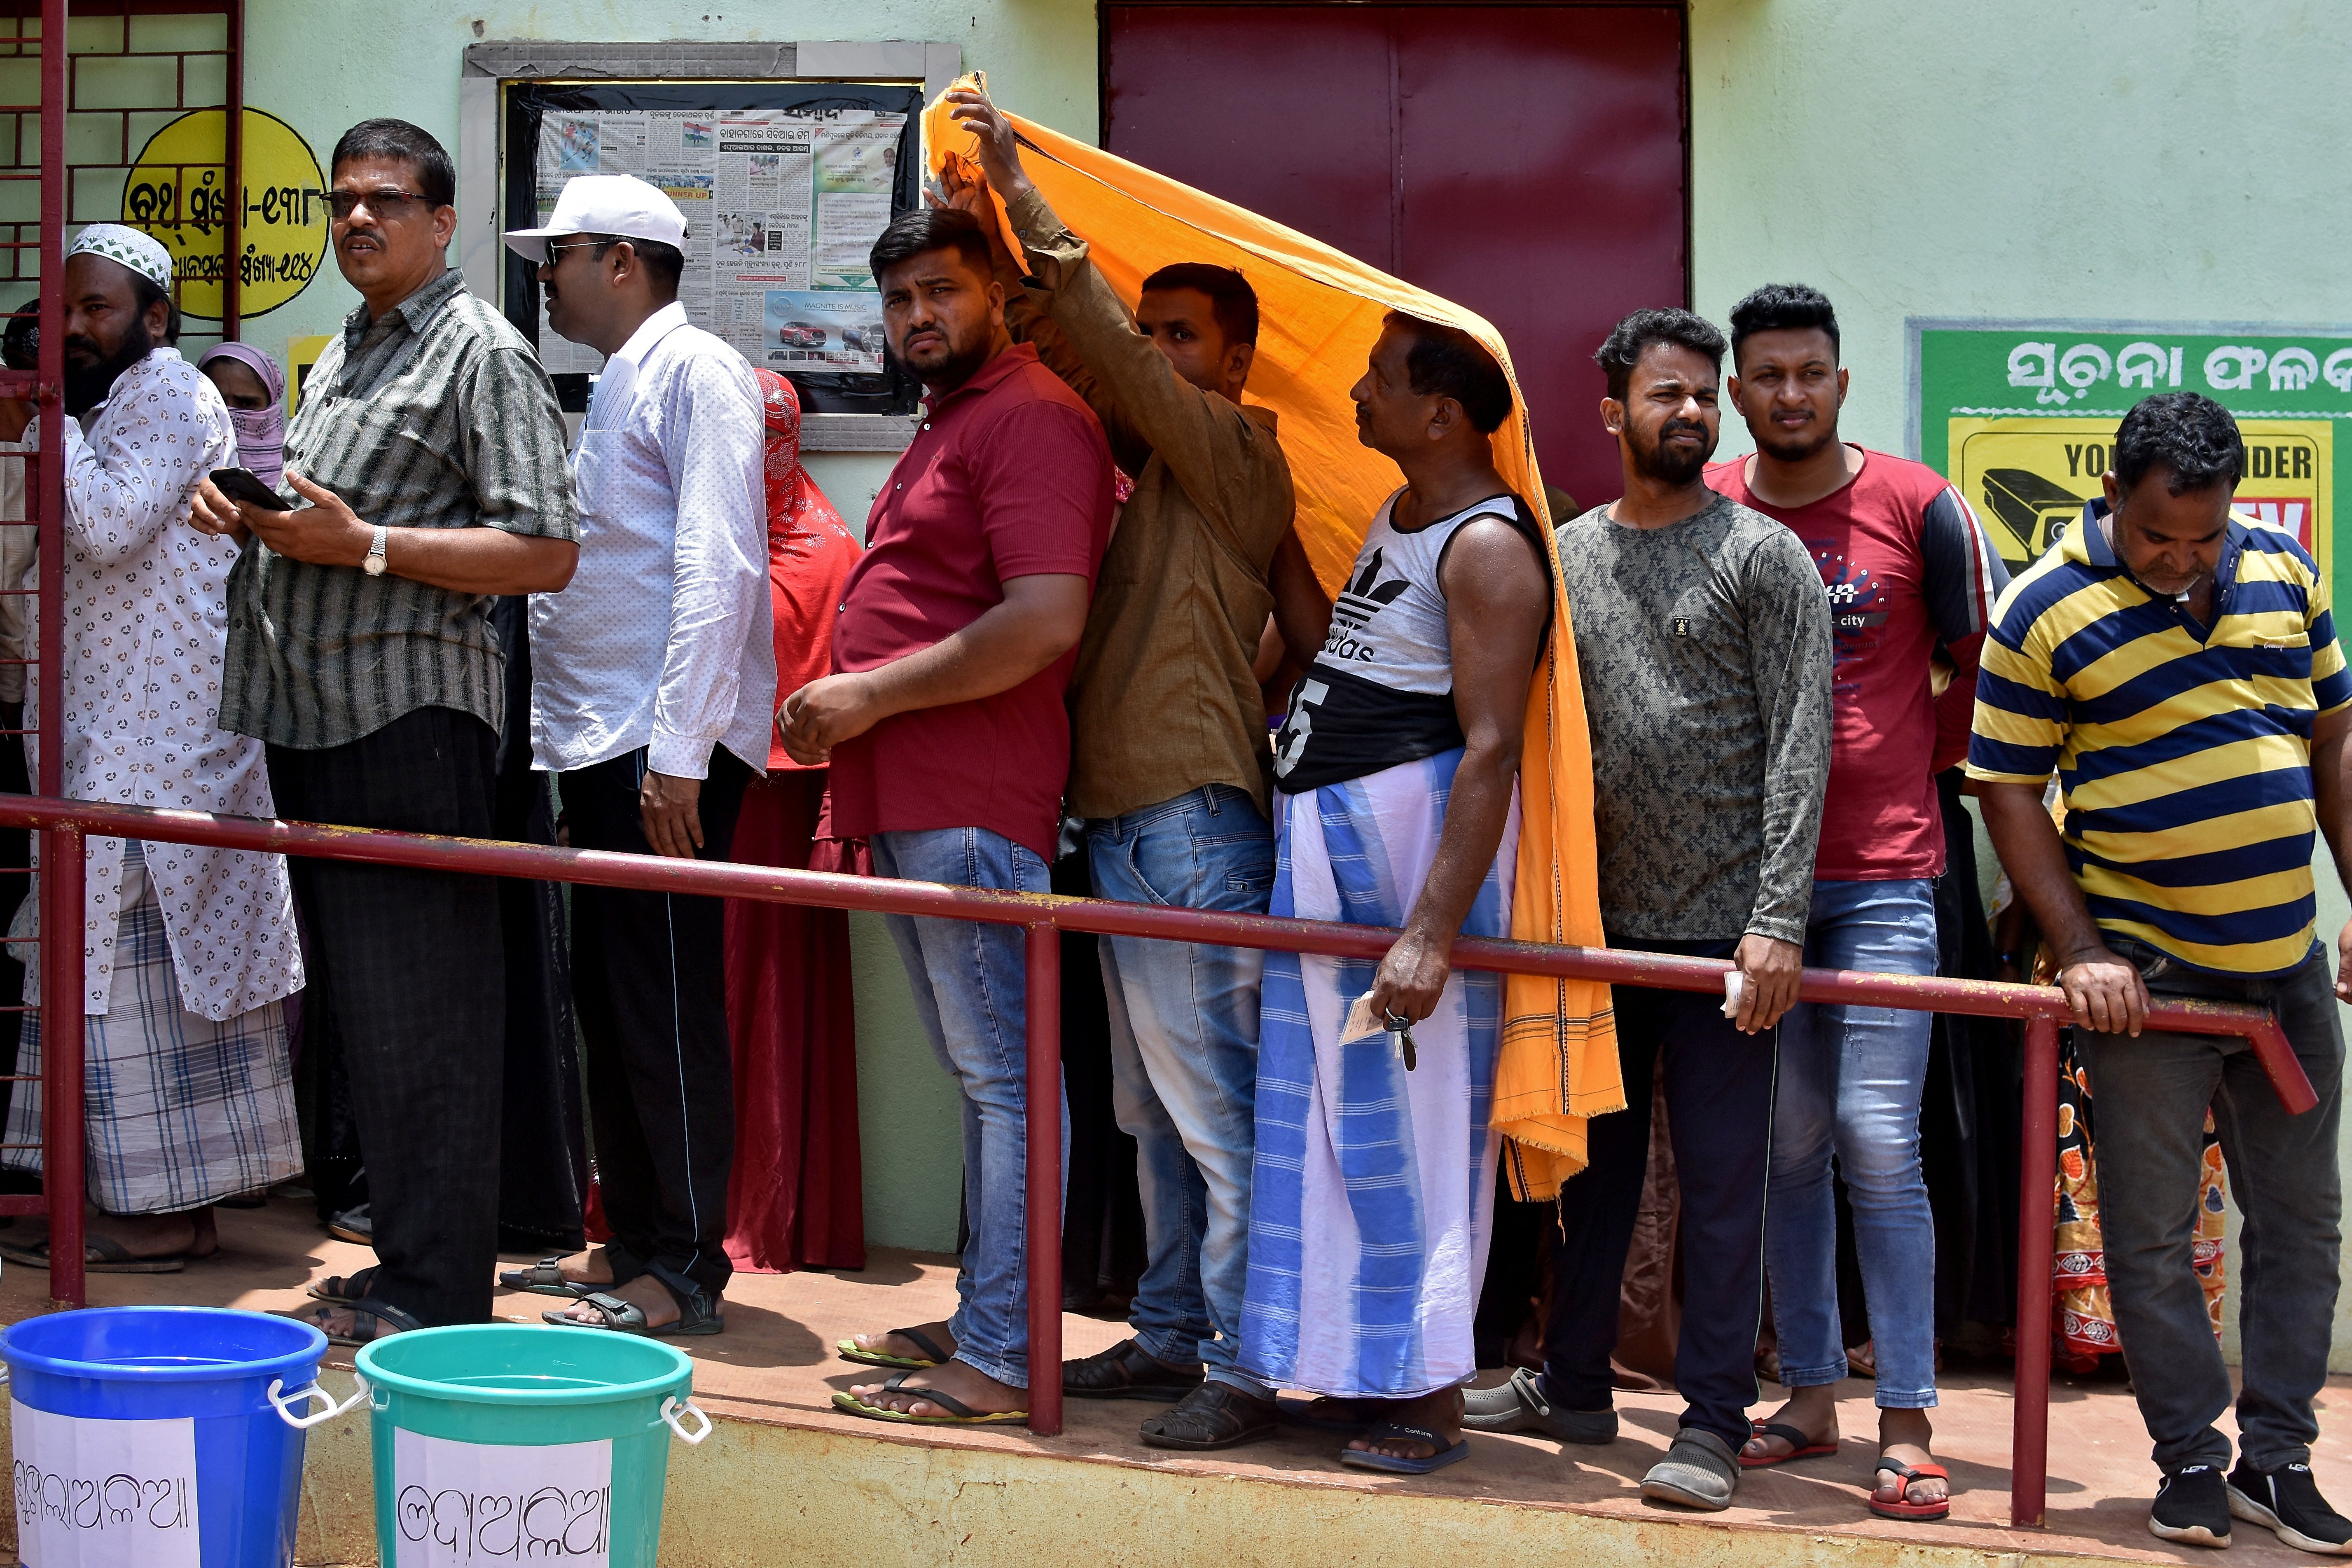 On a hot summer day in Bhubaneswar, India, men use stoles to shield themselves from the heat as they line up outside a polling station during the sixth phase of India's general elections.